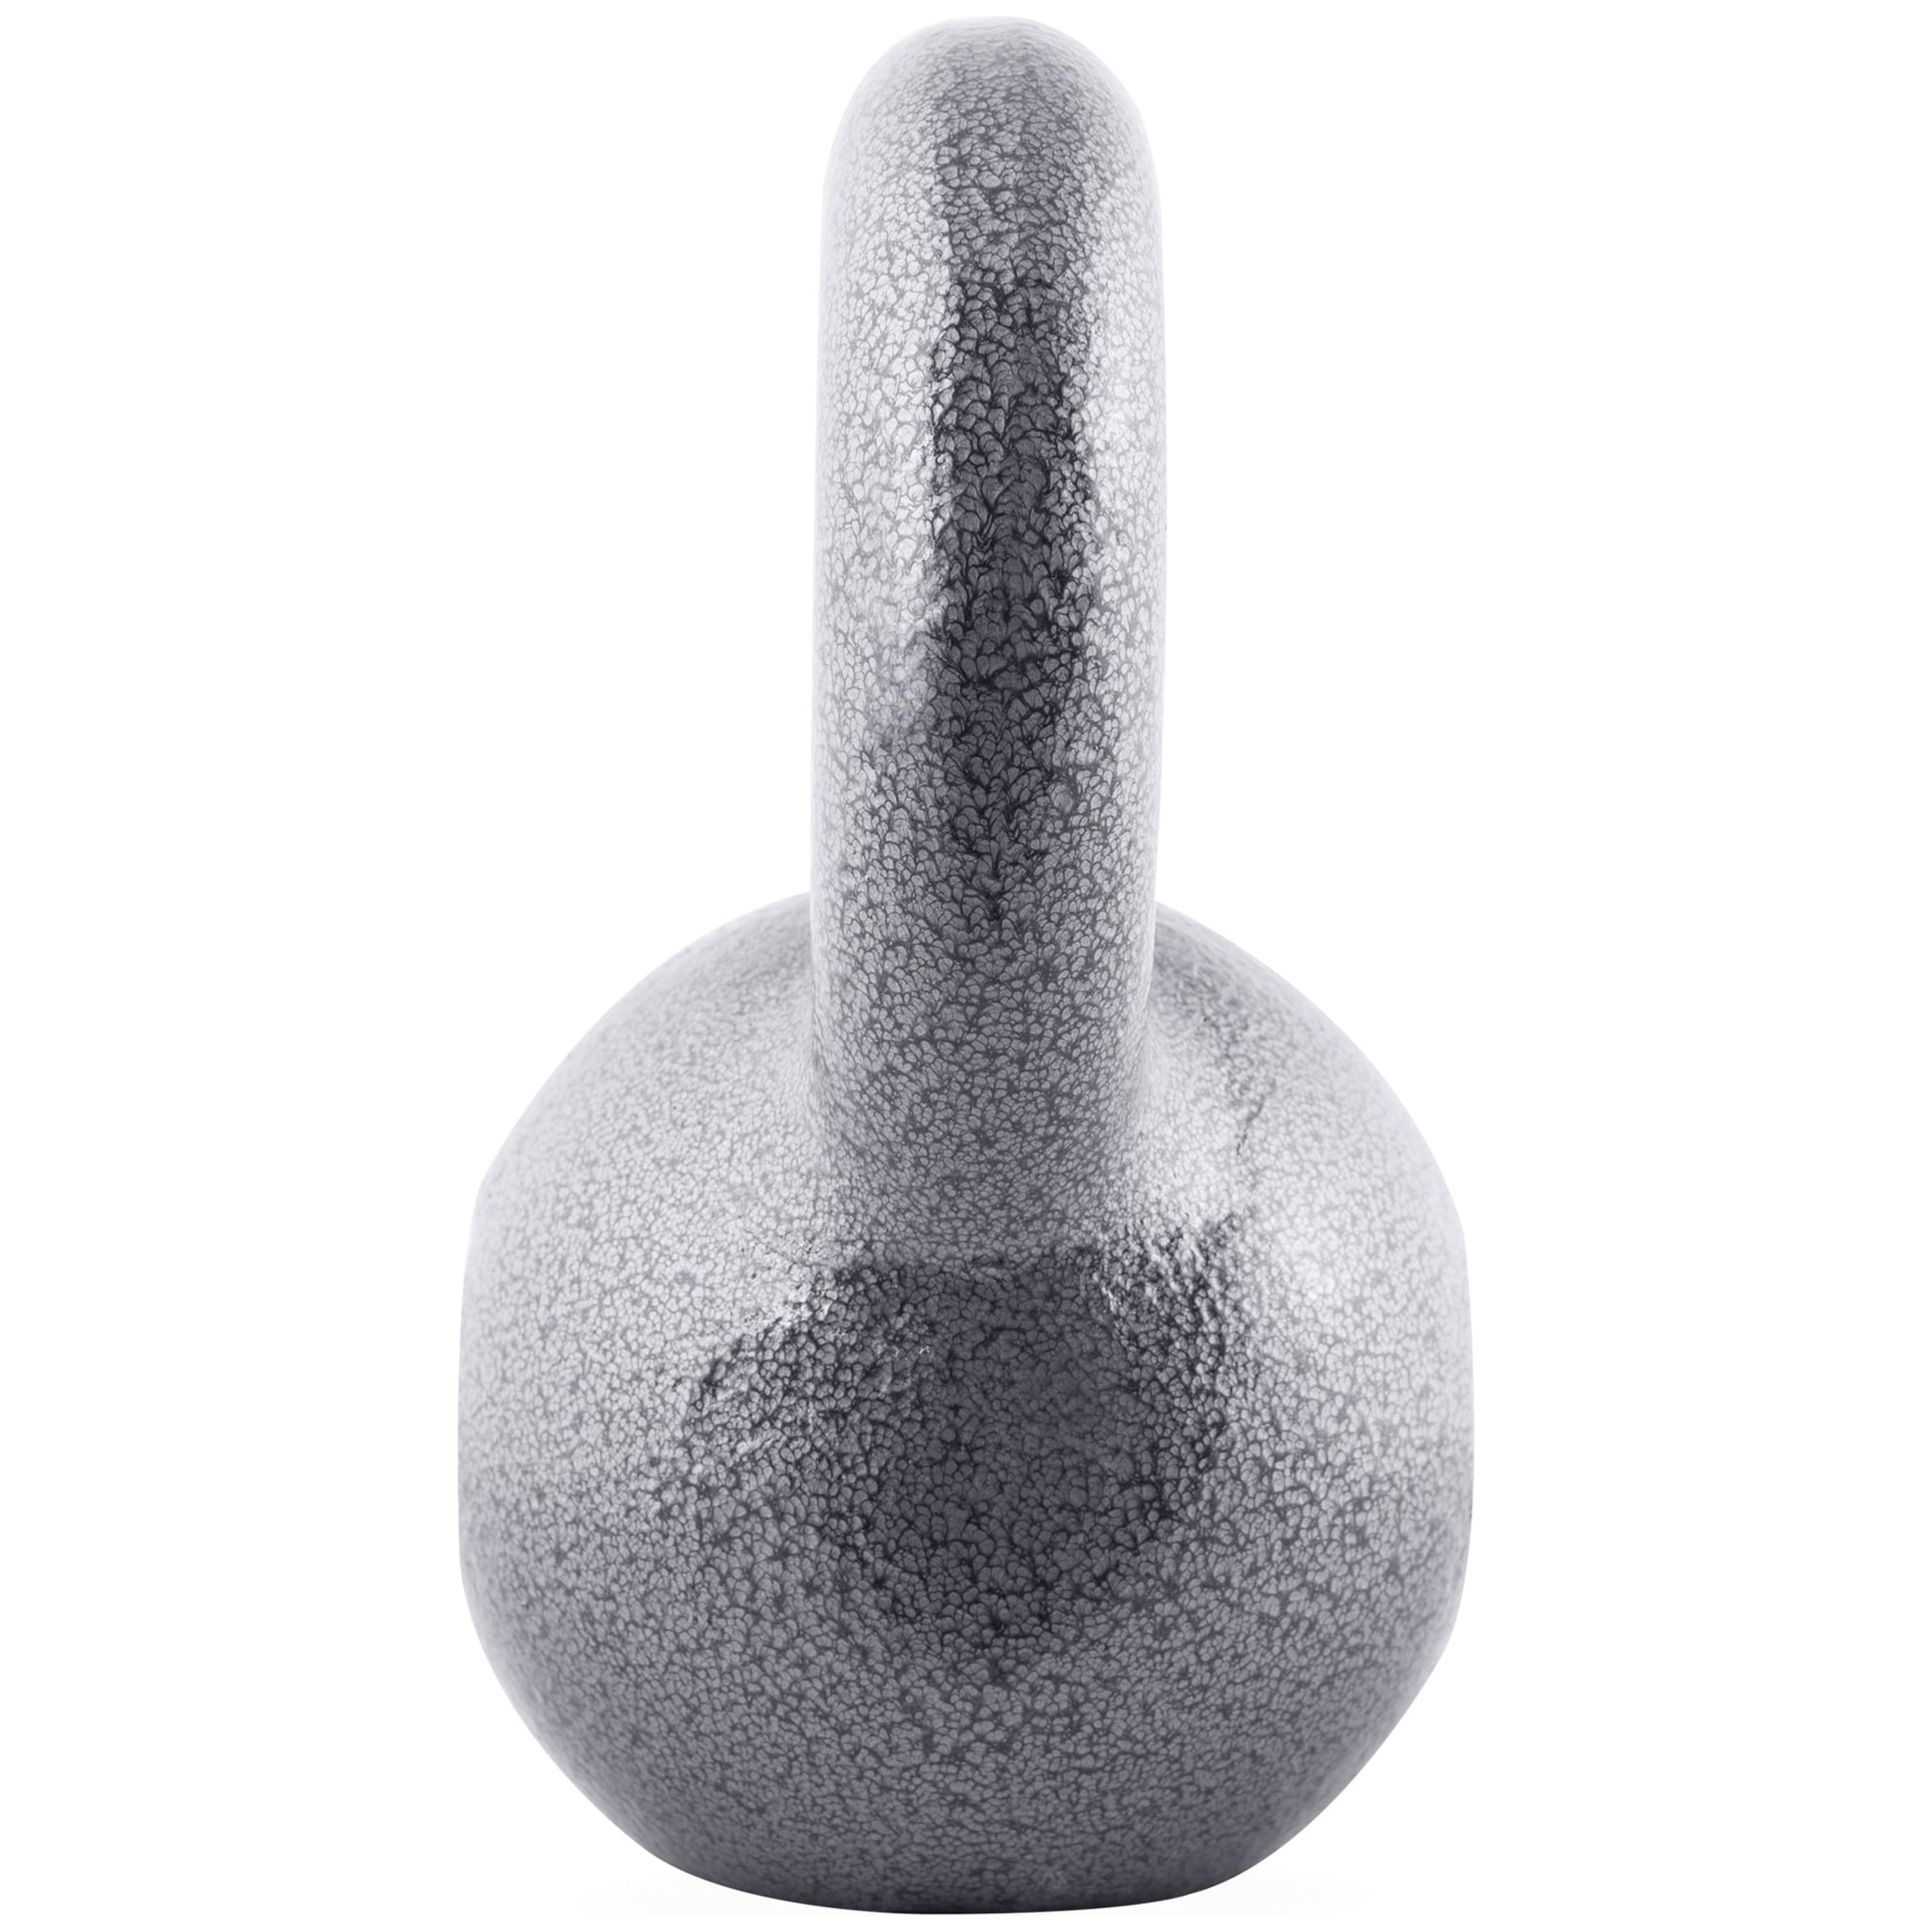 CAP Barbell Cast Iron Kettlebell, Single, 25-Pounds - image 5 of 7